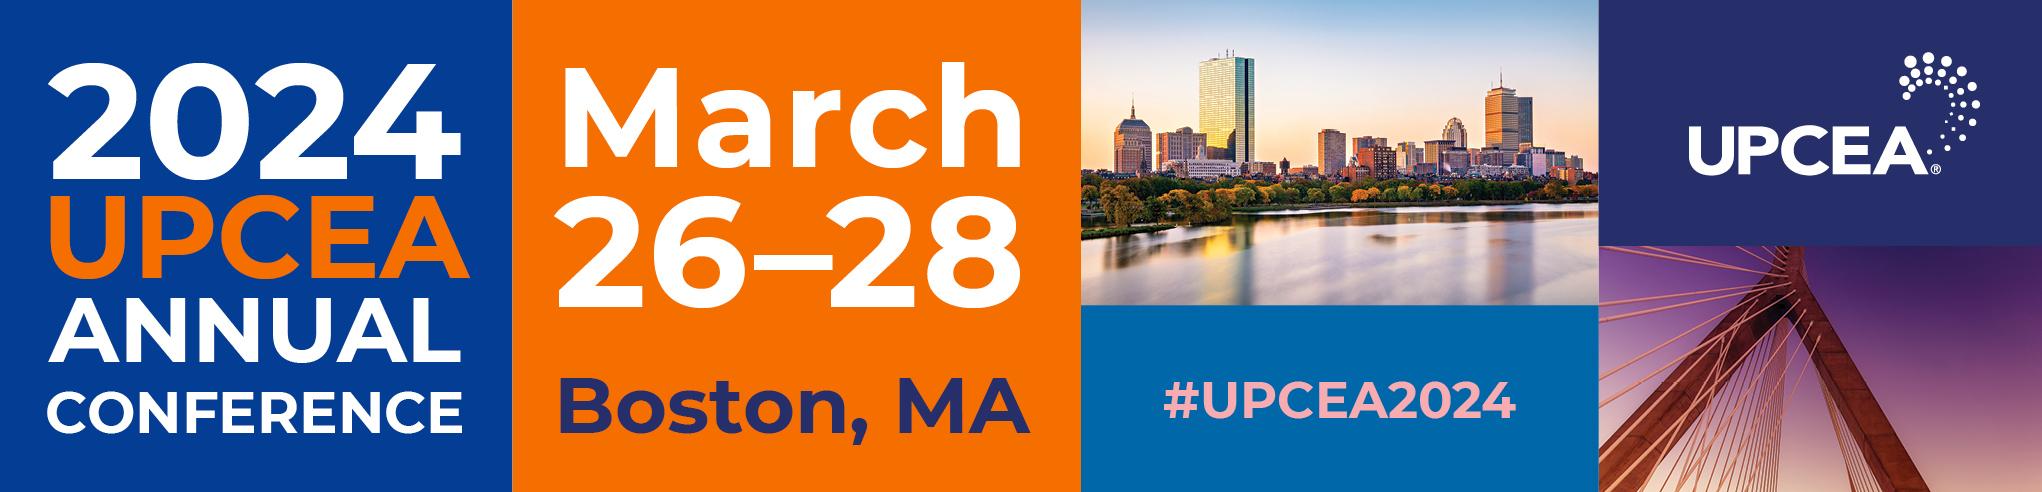 UPCEA Annual Conference 2024